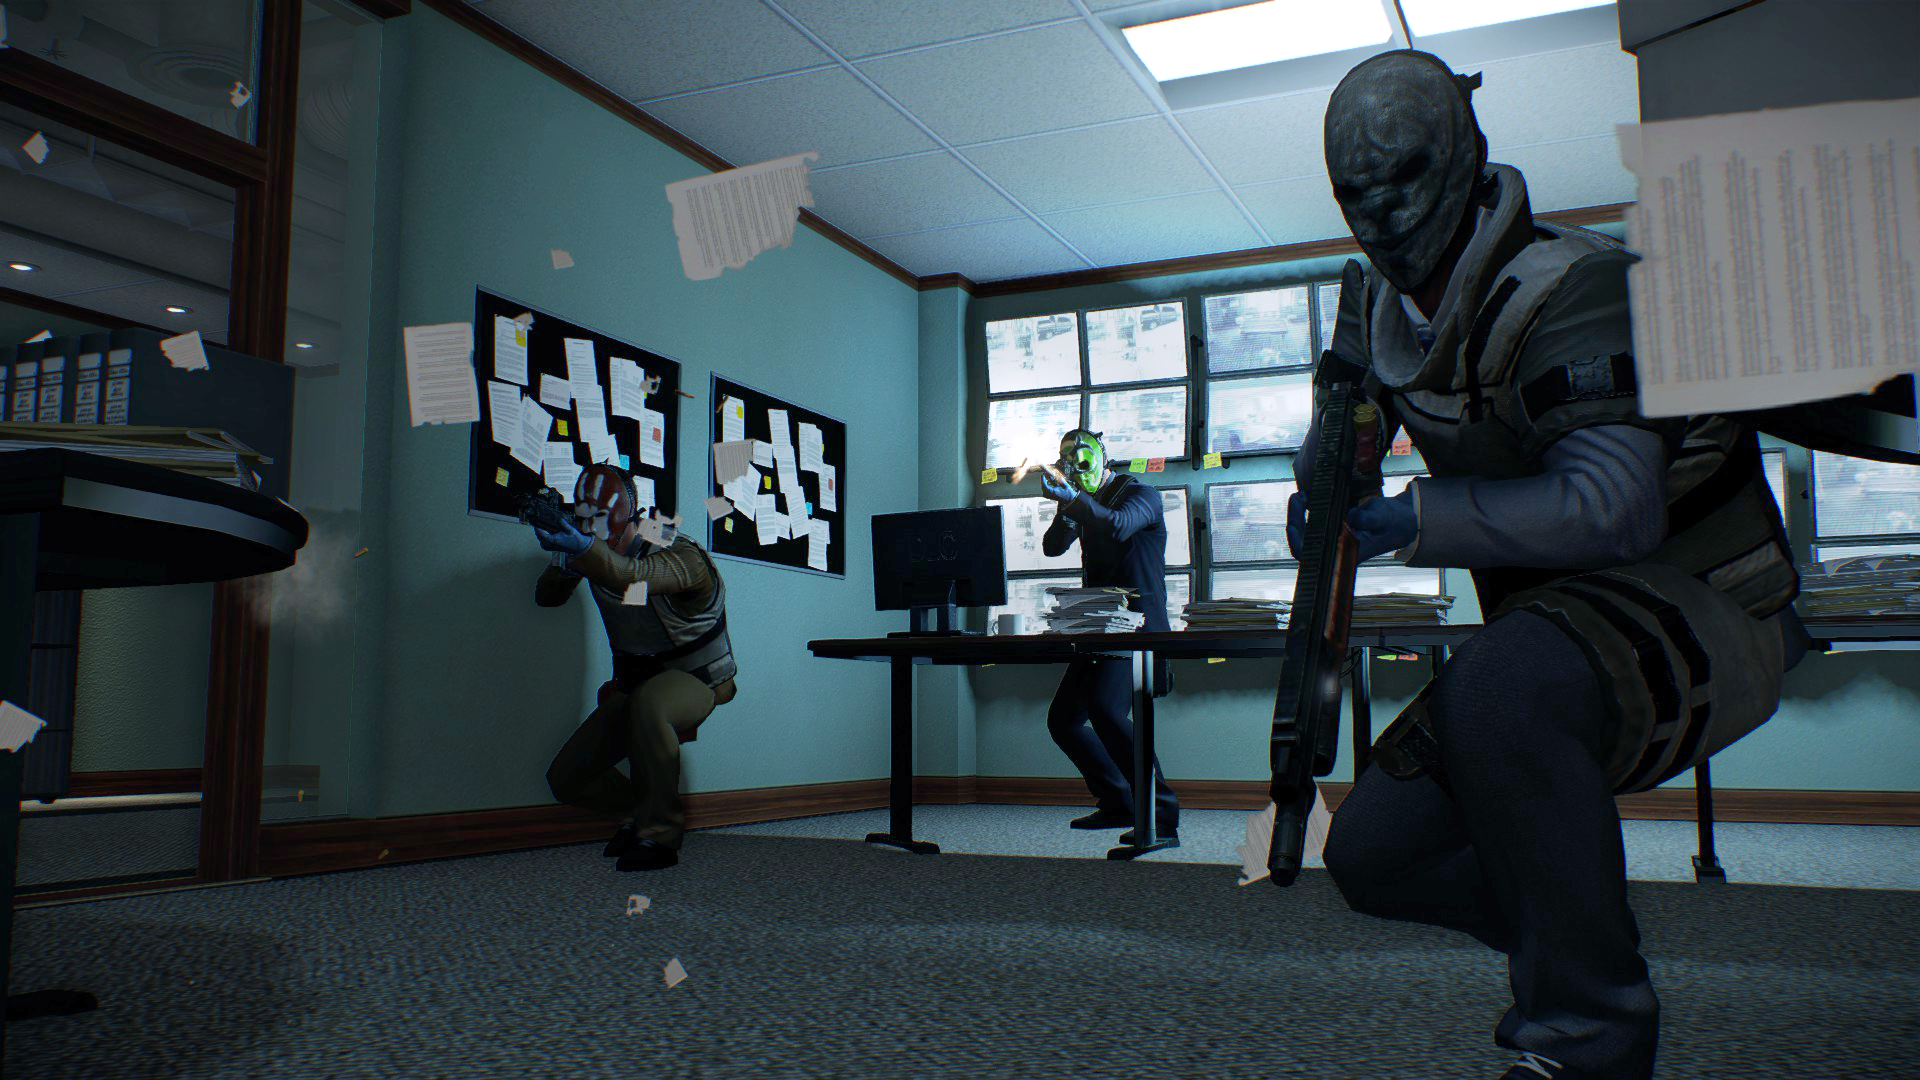 Game t org. Игра payday 2. Payday 2 ограбление банка. Payday 2 Xbox 360. Payday 2 (ps3).